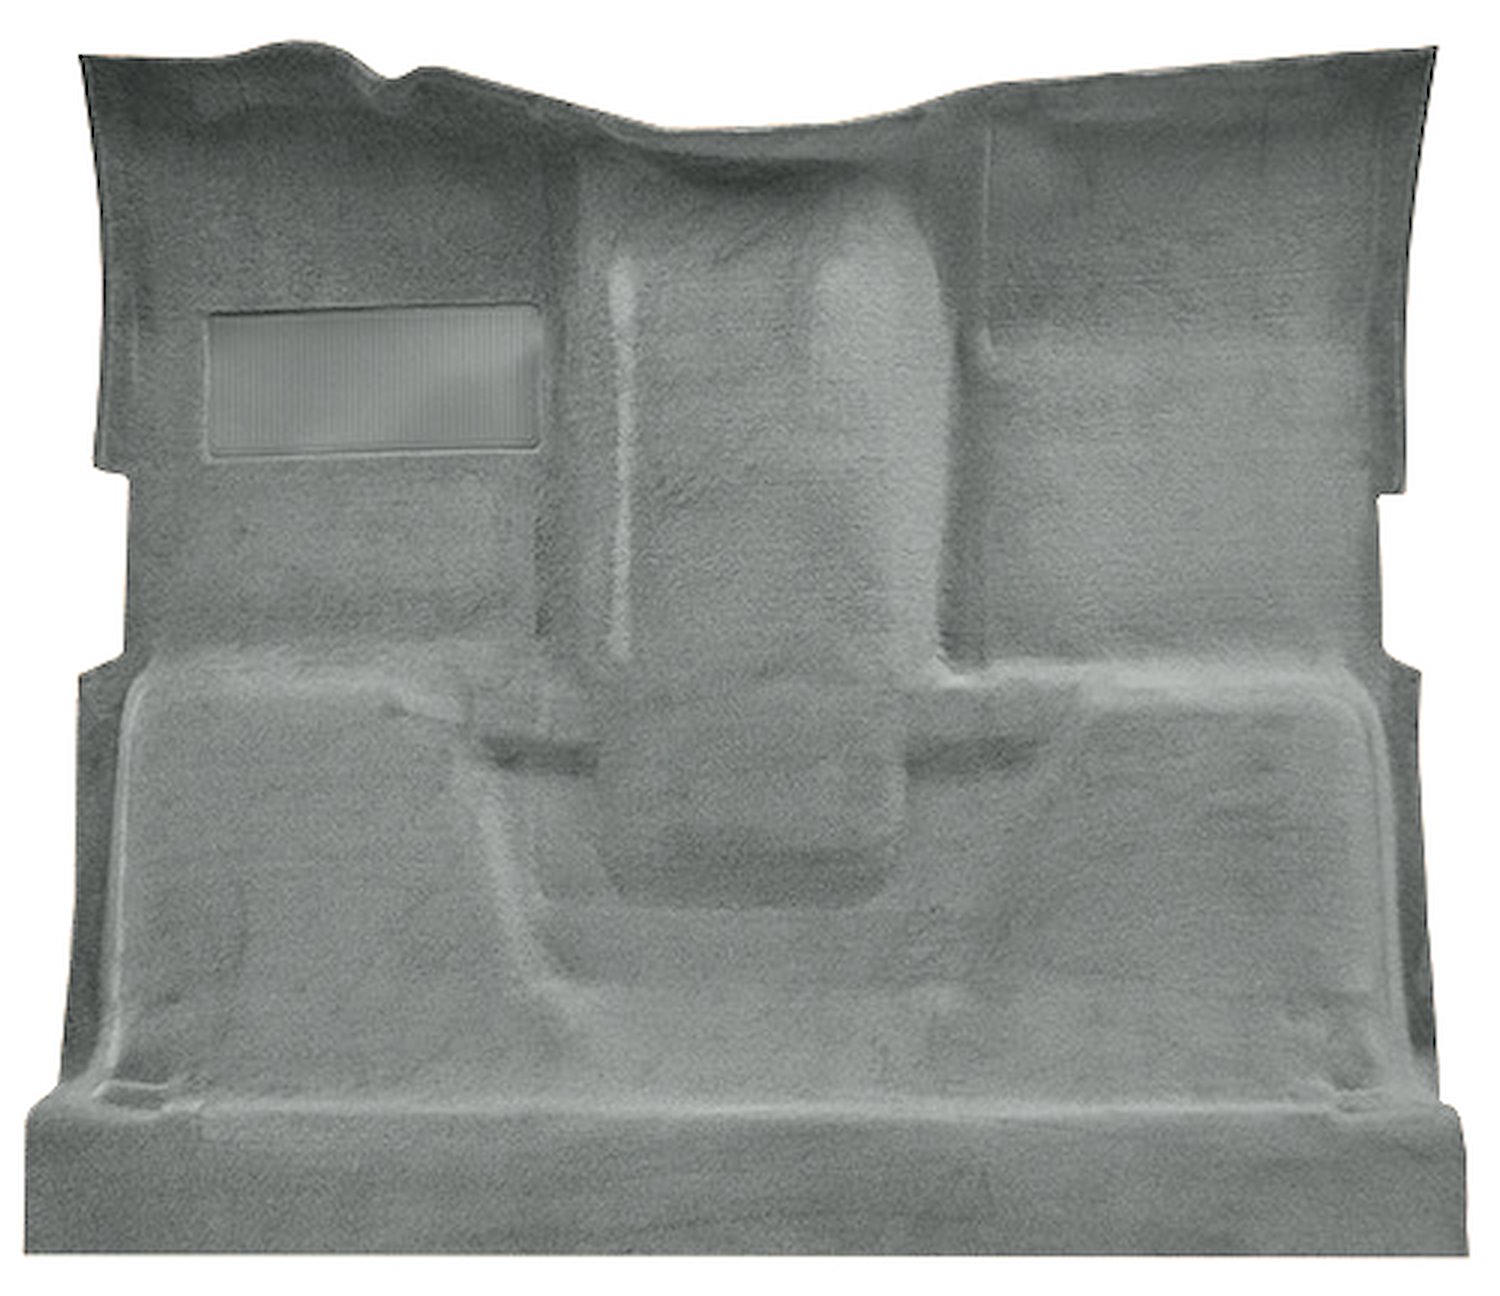 Molded Cut Pile Carpet for 1975-1980 Chevrolet/GMC K Series Truck [Mass Backing, 1-Piece, Dove Gray]